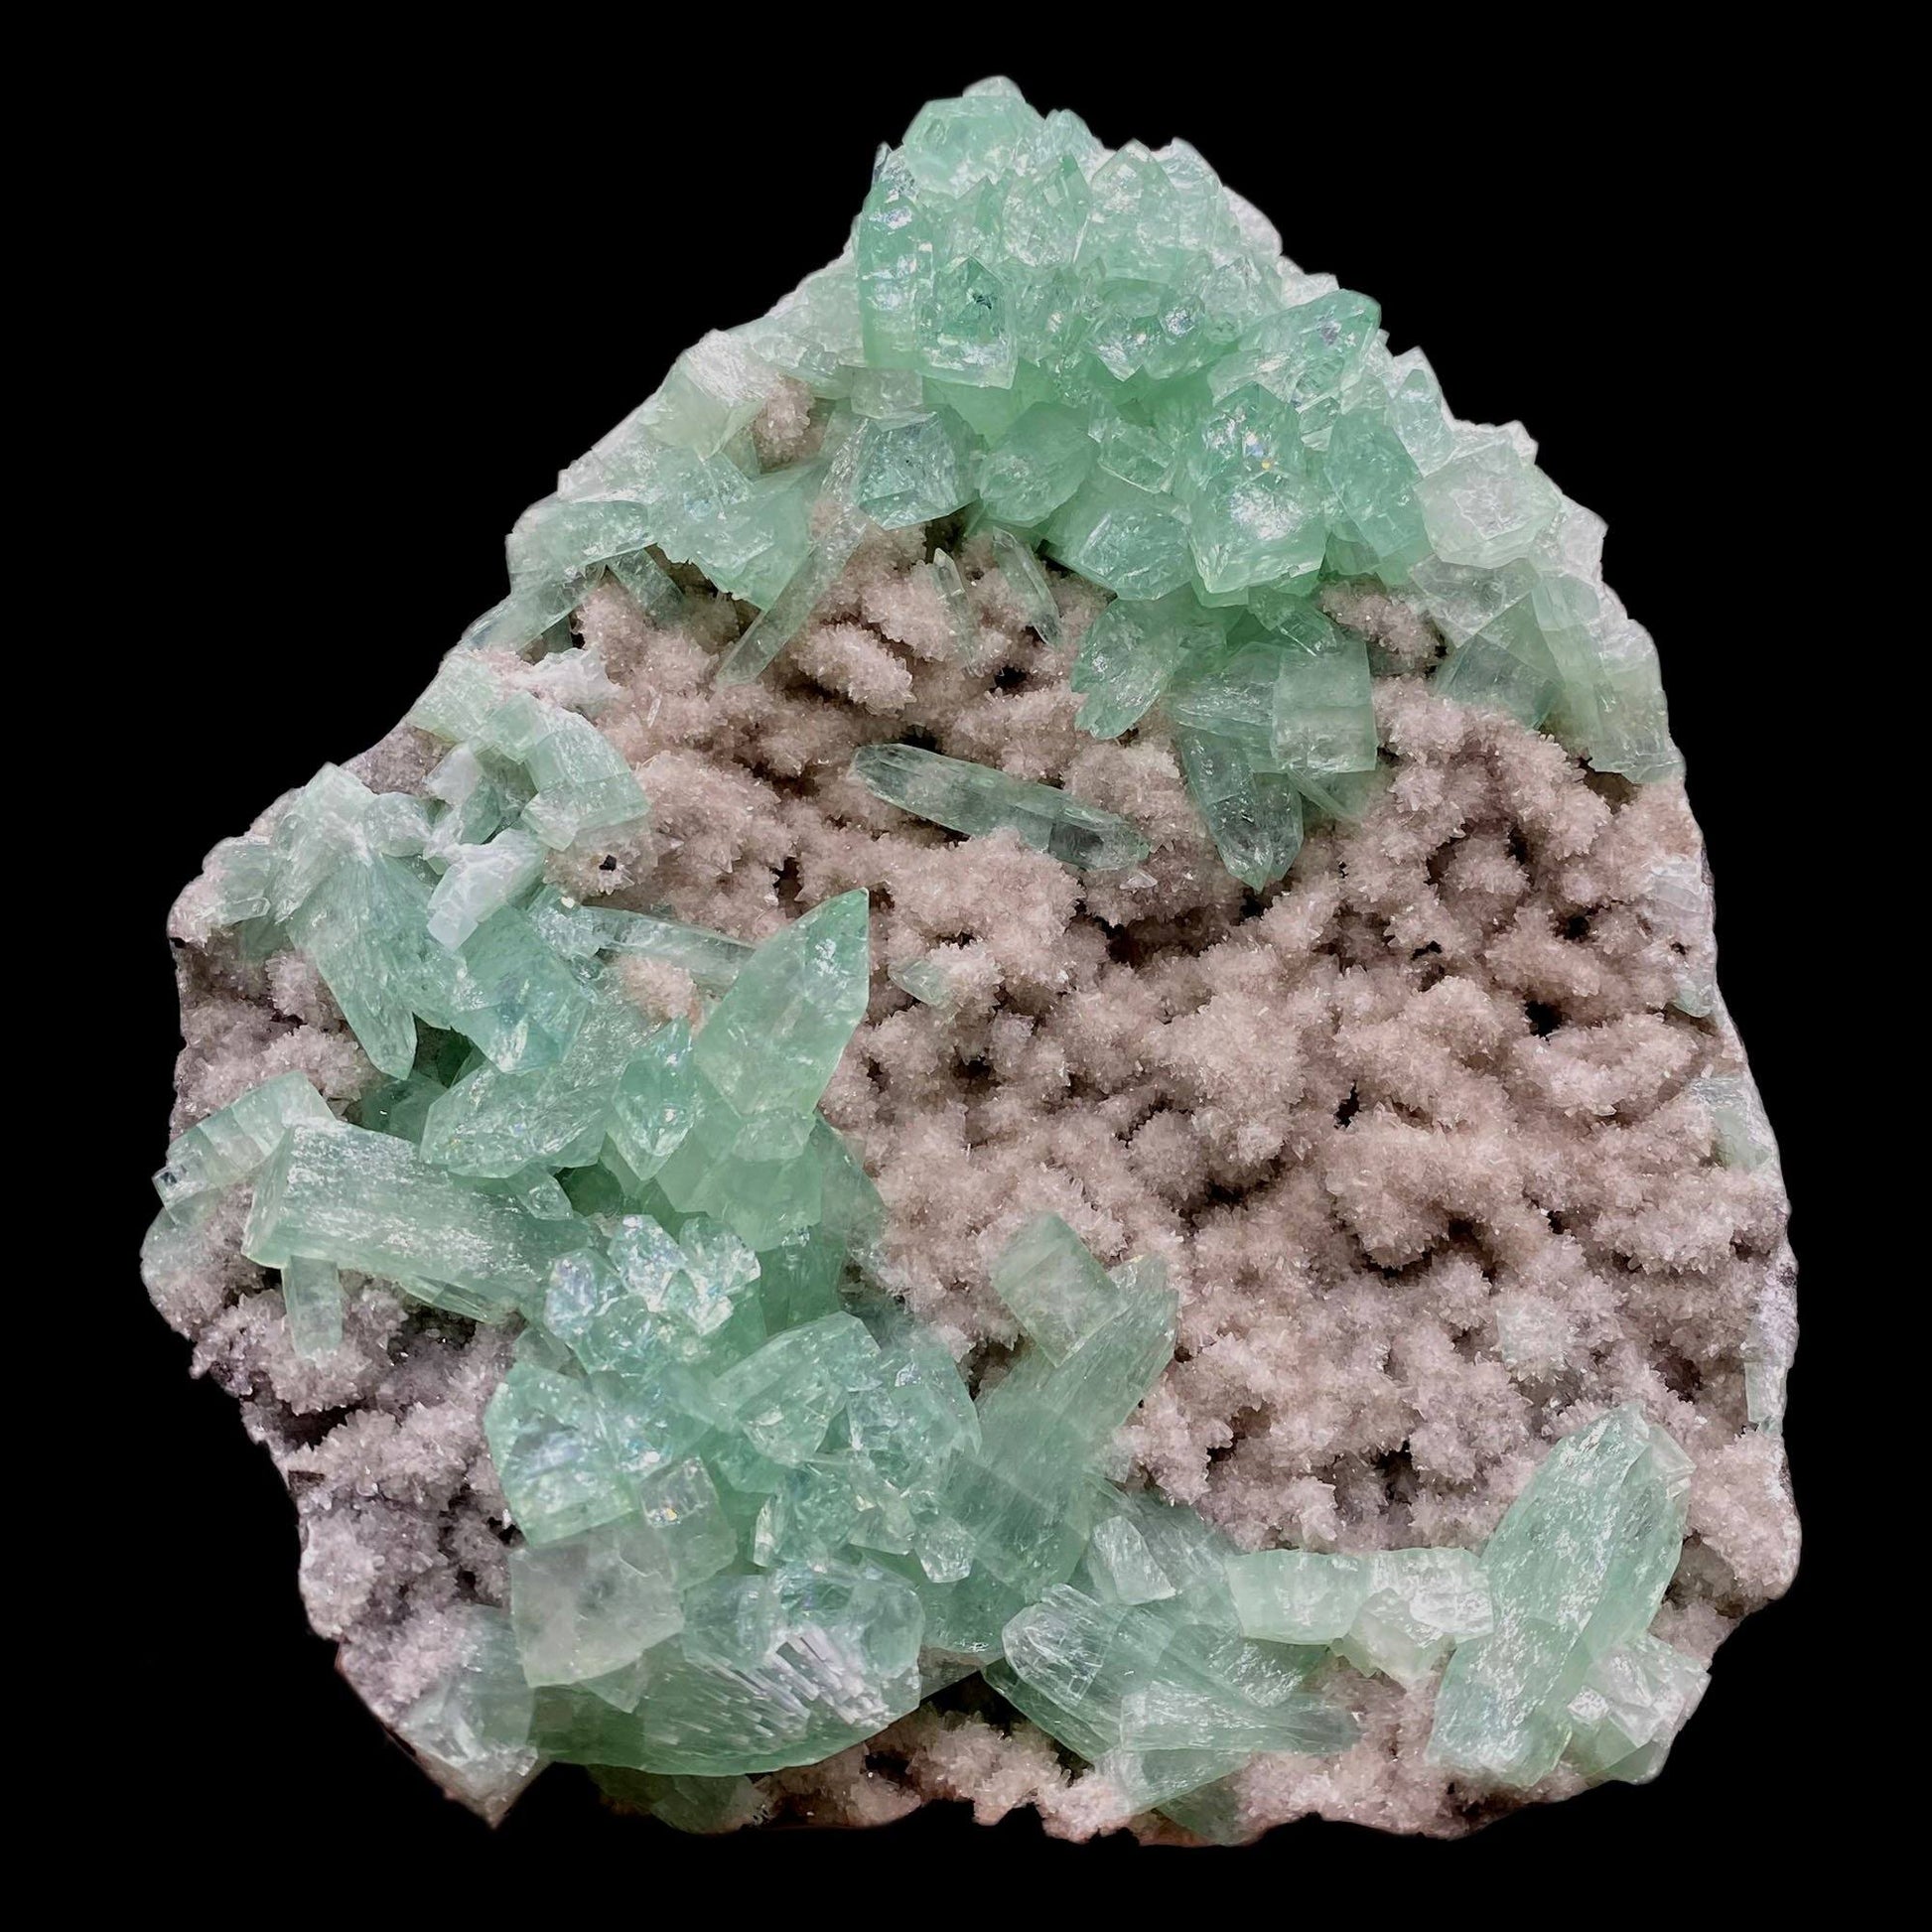 Green Apophyllite Sparkling Crystals on Heulandite Cluster # Q2  https://www.superbminerals.us/products/green-apophyllite-sparkling-crystals-on-heulandite-cluster-q2  Features:Sparkling cluster of green Apophyllite crystals in a radiating formation on matrix lined with creme-colored stilbite crystals in aggregates. The apophyllite crystals are fully terminated with vivd green color and glassy luster.&nbsp;Primary Mineral(s): ApophylliteSecondary Mineral(s): N/A Matrix: Heulandite